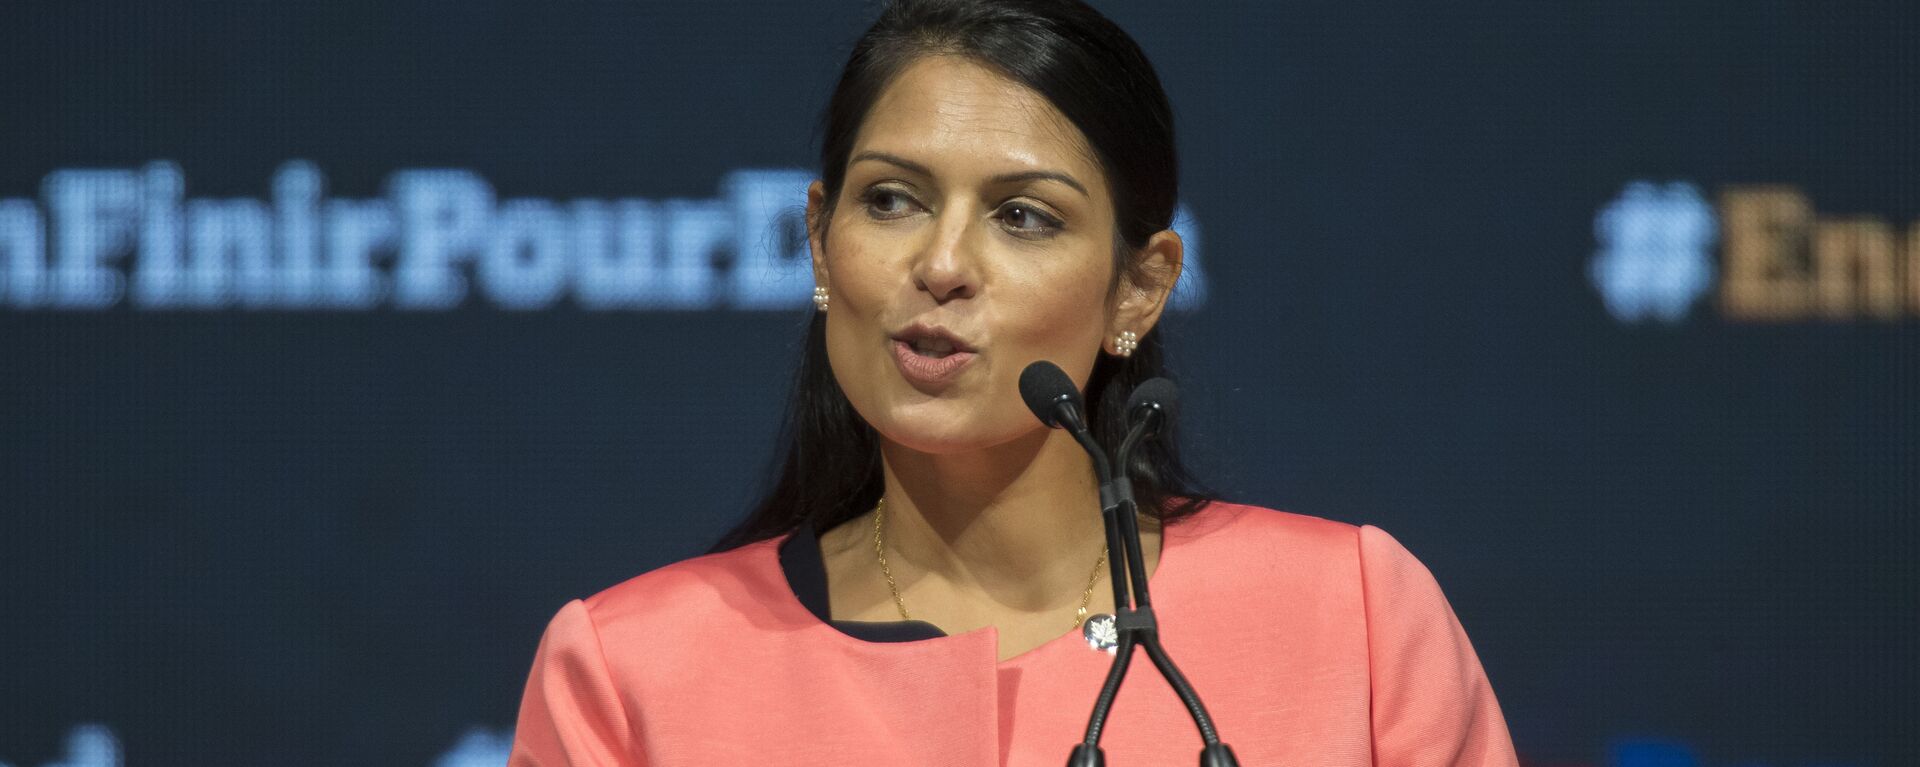 Priti Patel, the United Kindom's Secretary of State for International Development speaks at the closing of the Fifth Replenishment Conference of the Global Fund to Fight AIDS, Tuberculosis and Malaria in Montreal, Quebec, September 17, 2016 - Sputnik International, 1920, 22.11.2021